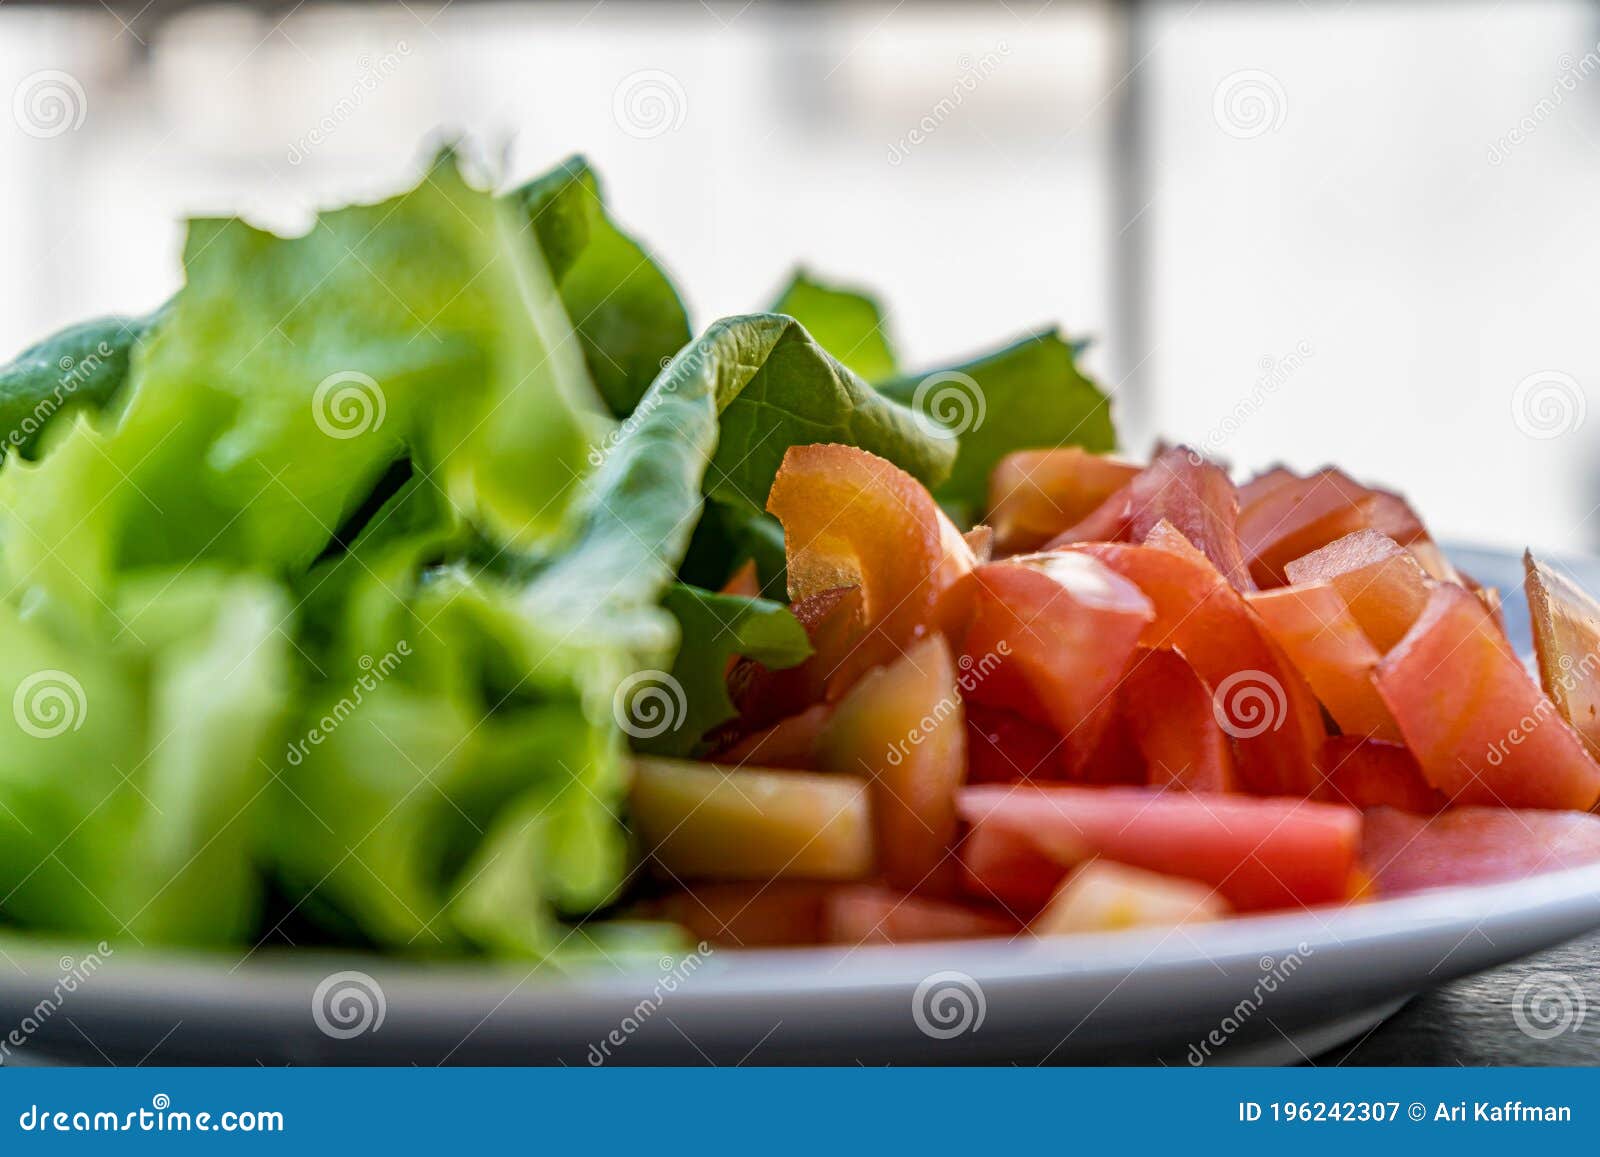 close up of tomatoes and lettuce